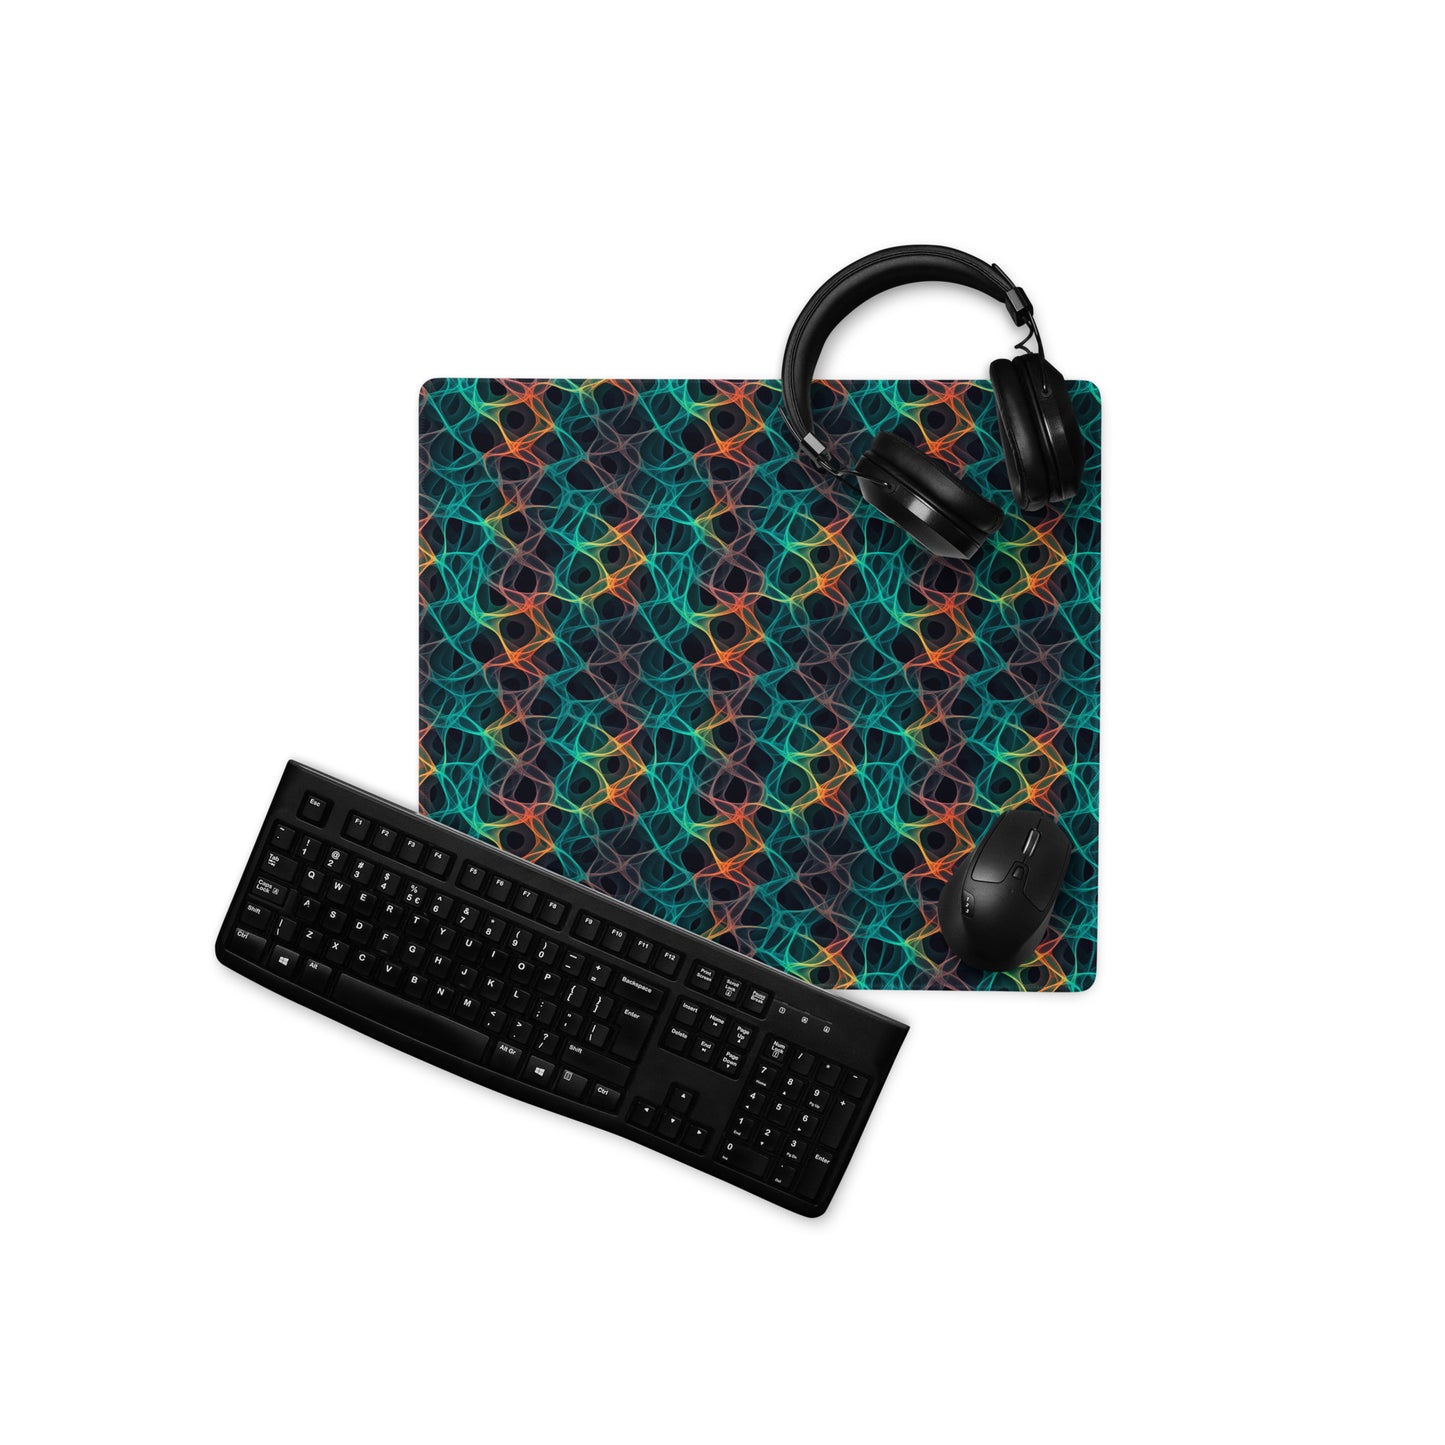 A 18" x 16" desk pad with an abstract pattern resembling a cell structure on it displayed with a keyboard, headphones and a mouse. Rainbow in color.